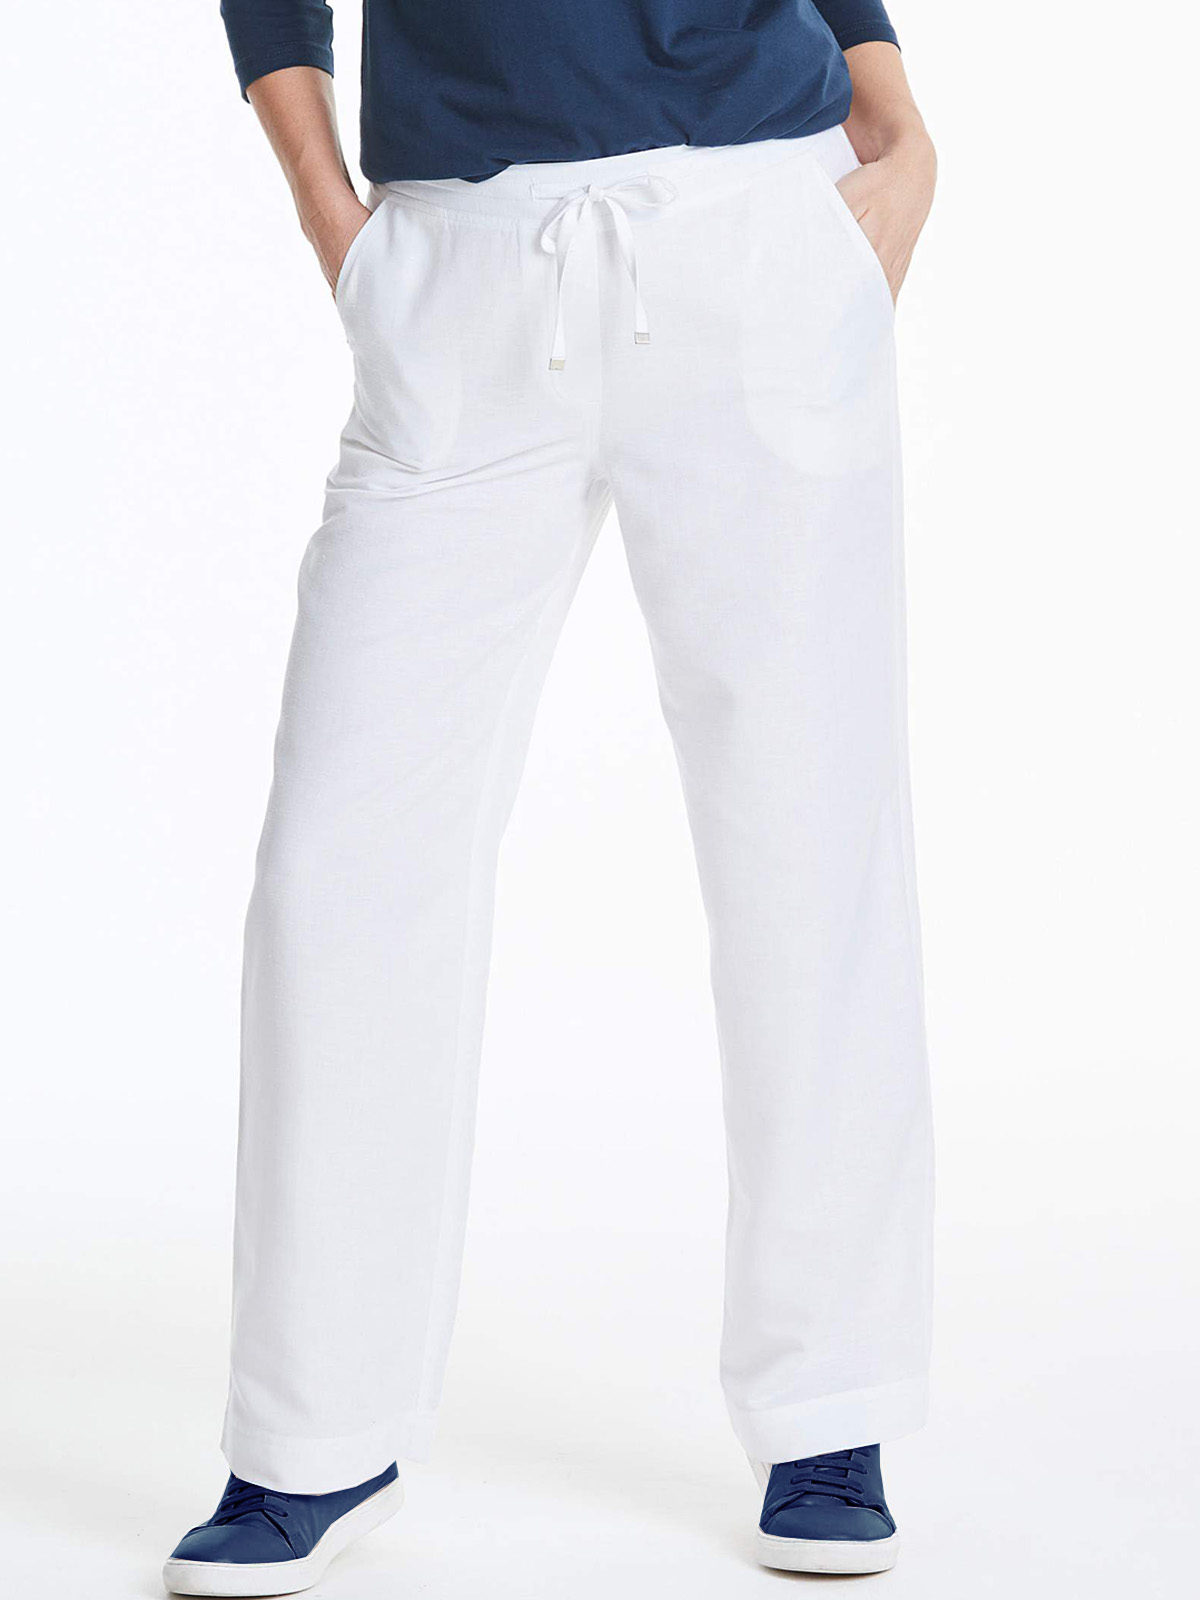 Capsule - - WHITE Linen Blend Easy Care Trousers - Size 10 to 28